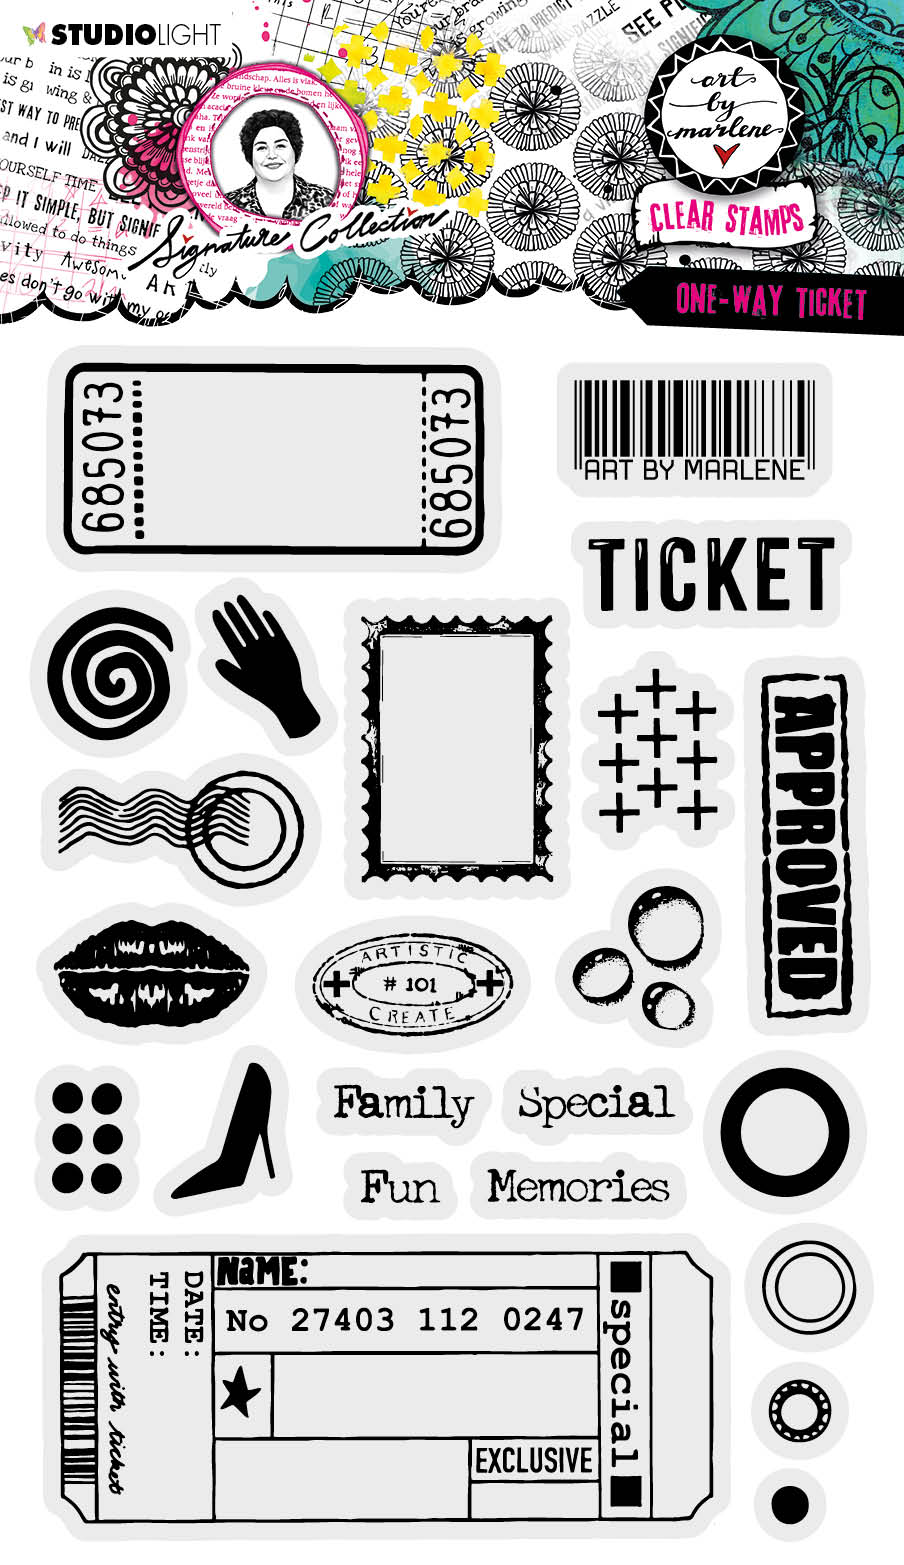 ABM Clear Stamp One-Way Ticket Signature Collection 265x153x1mm 23 PC nr.471